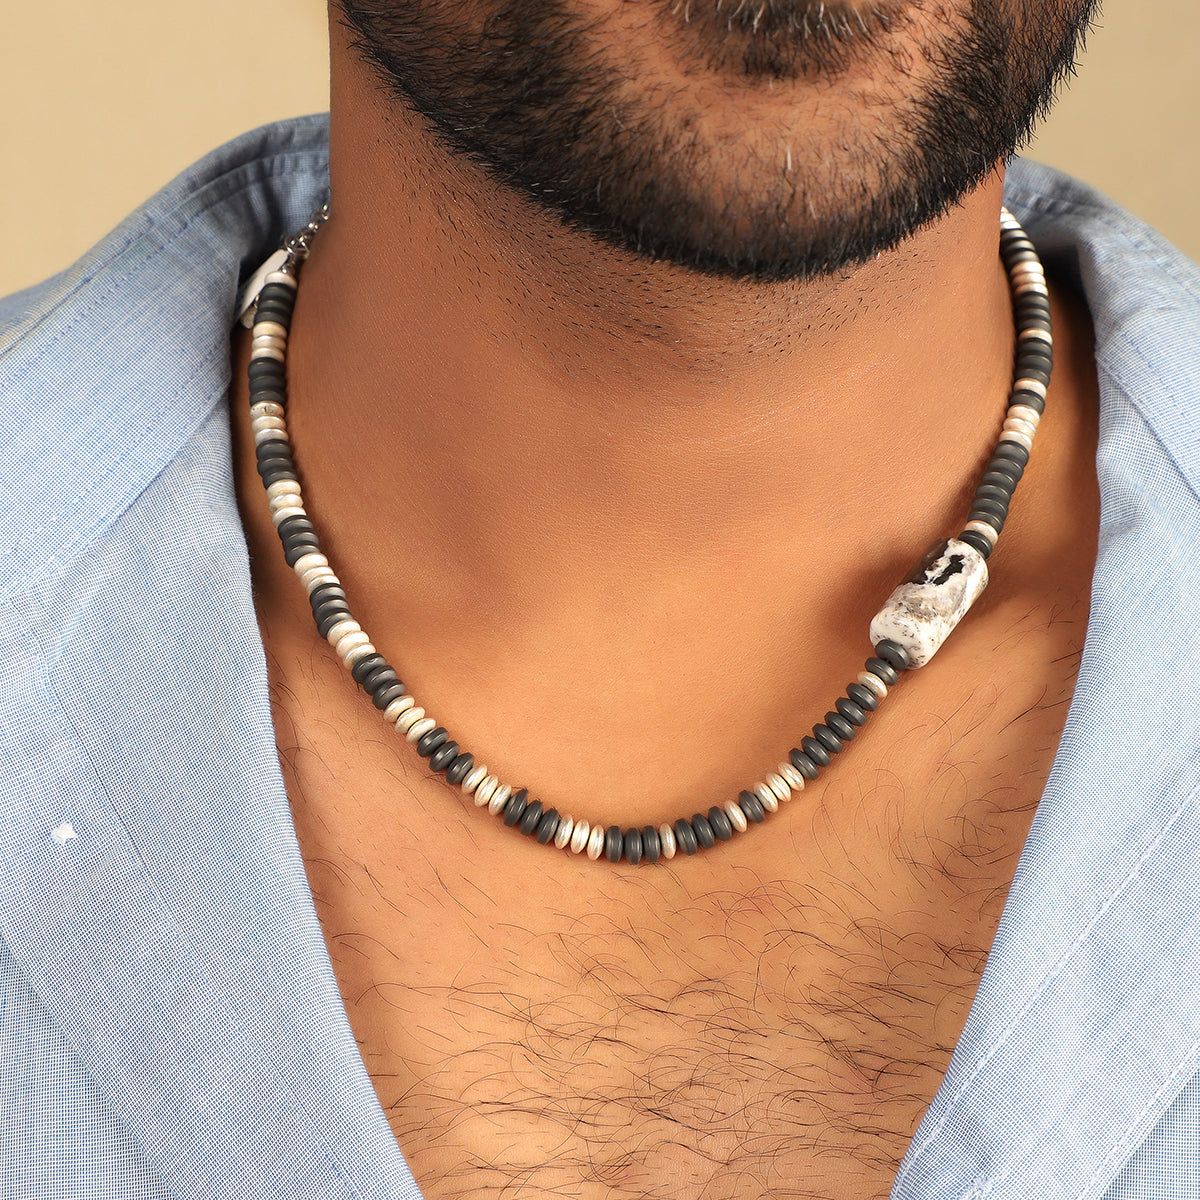 Mens tribal,african necklace,leather,yak bone pendant,beaded,leather,hand  made | eBay